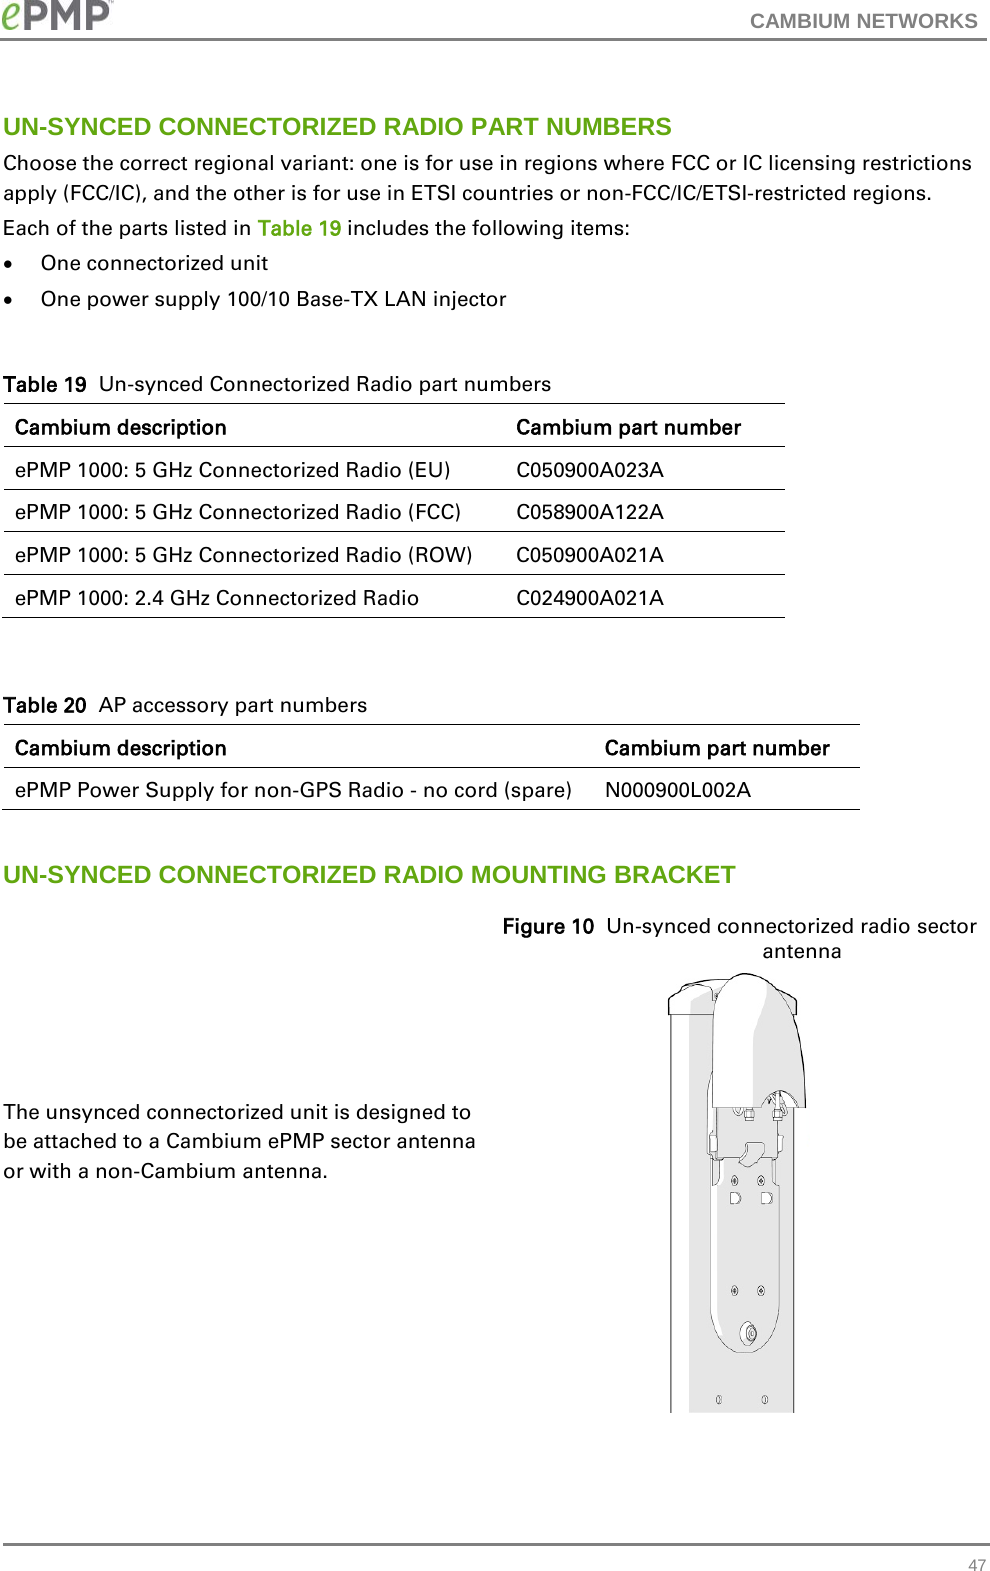 CAMBIUM NETWORKS  UN-SYNCED CONNECTORIZED RADIO PART NUMBERS Choose the correct regional variant: one is for use in regions where FCC or IC licensing restrictions apply (FCC/IC), and the other is for use in ETSI countries or non-FCC/IC/ETSI-restricted regions. Each of the parts listed in Table 19 includes the following items: • One connectorized unit • One power supply 100/10 Base-TX LAN injector  Table 19  Un-synced Connectorized Radio part numbers Cambium description Cambium part number ePMP 1000: 5 GHz Connectorized Radio (EU) C050900A023A ePMP 1000: 5 GHz Connectorized Radio (FCC) C058900A122A ePMP 1000: 5 GHz Connectorized Radio (ROW) C050900A021A ePMP 1000: 2.4 GHz Connectorized Radio C024900A021A  Table 20  AP accessory part numbers Cambium description Cambium part number ePMP Power Supply for non-GPS Radio - no cord (spare) N000900L002A  UN-SYNCED CONNECTORIZED RADIO MOUNTING BRACKET The unsynced connectorized unit is designed to be attached to a Cambium ePMP sector antenna or with a non-Cambium antenna.  Figure 10  Un-synced connectorized radio sector antenna     47 